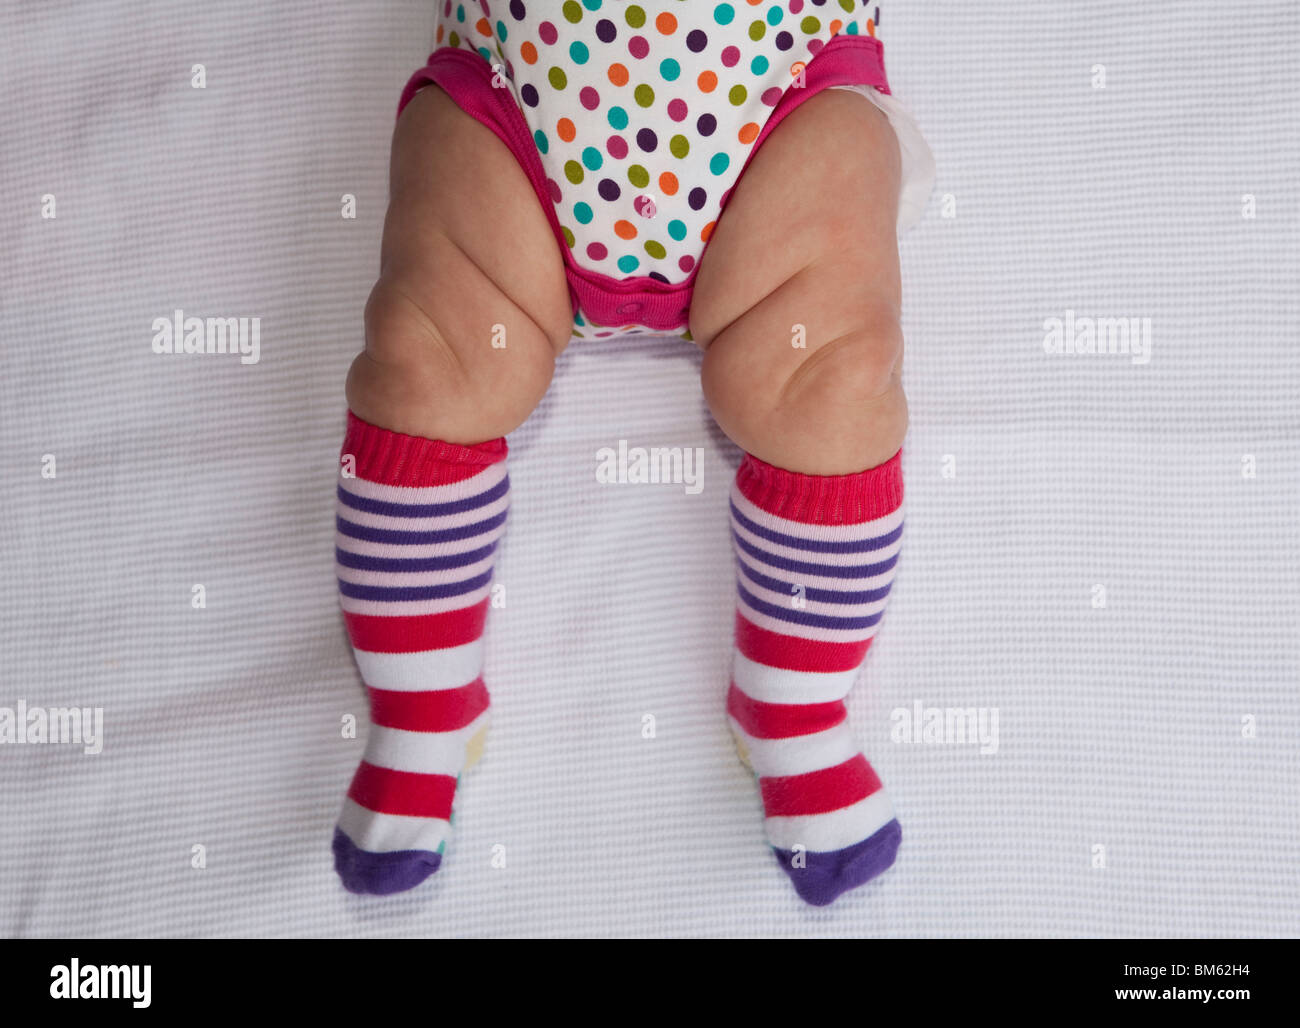 Fat legs belonging to 6 month old baby girl Stock Photo